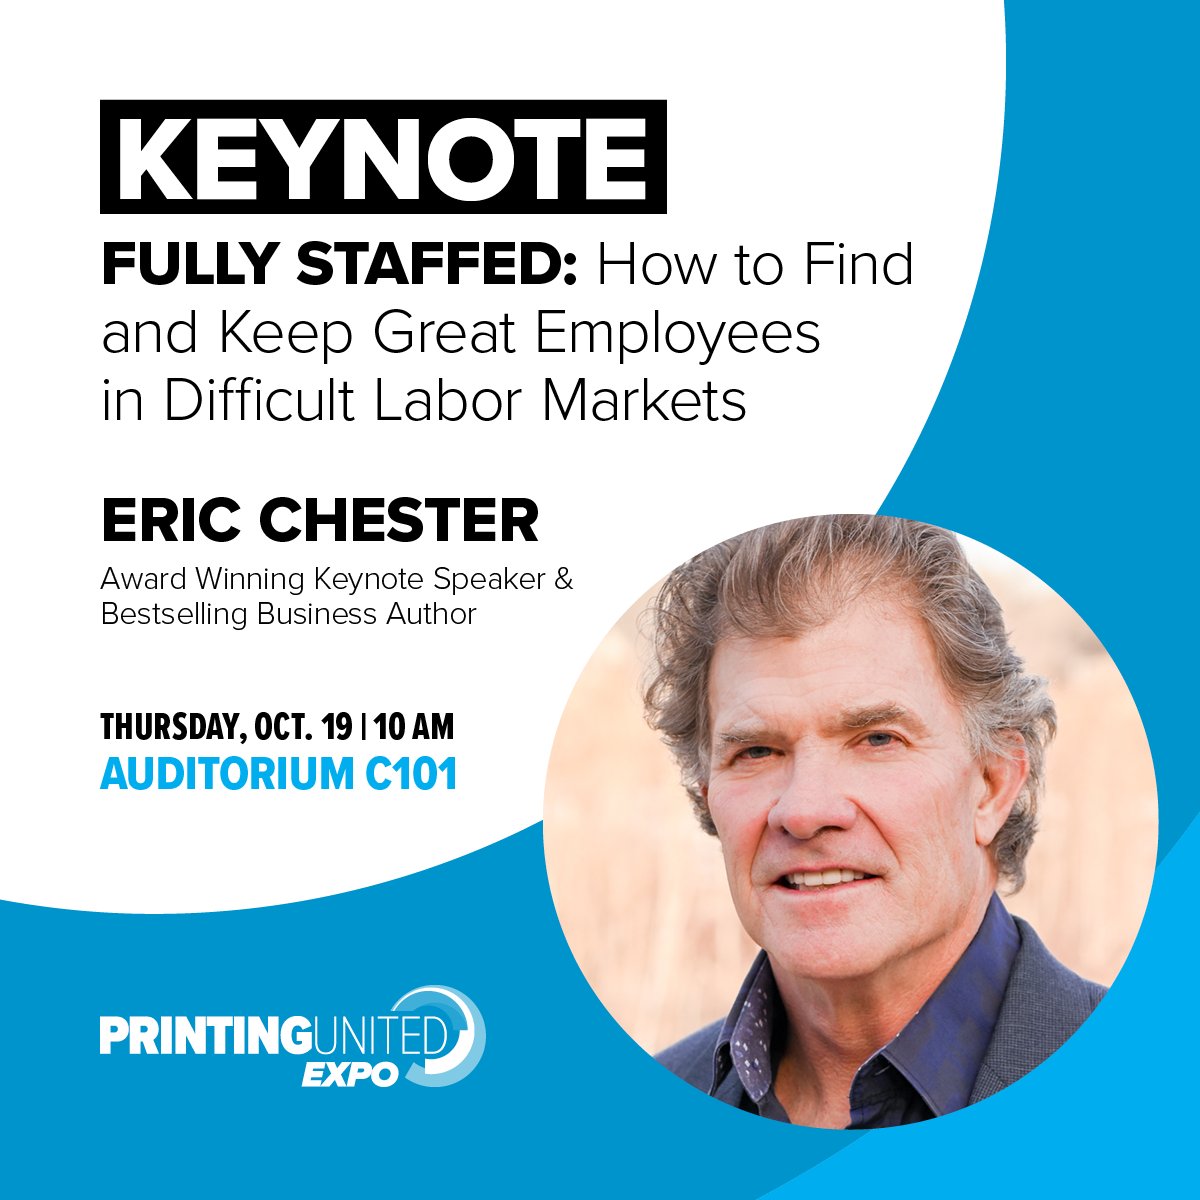 Don't miss our second keynote session with Eric Chester today at 10 AM! Exclusively at #PRINTINGUnitedExpo